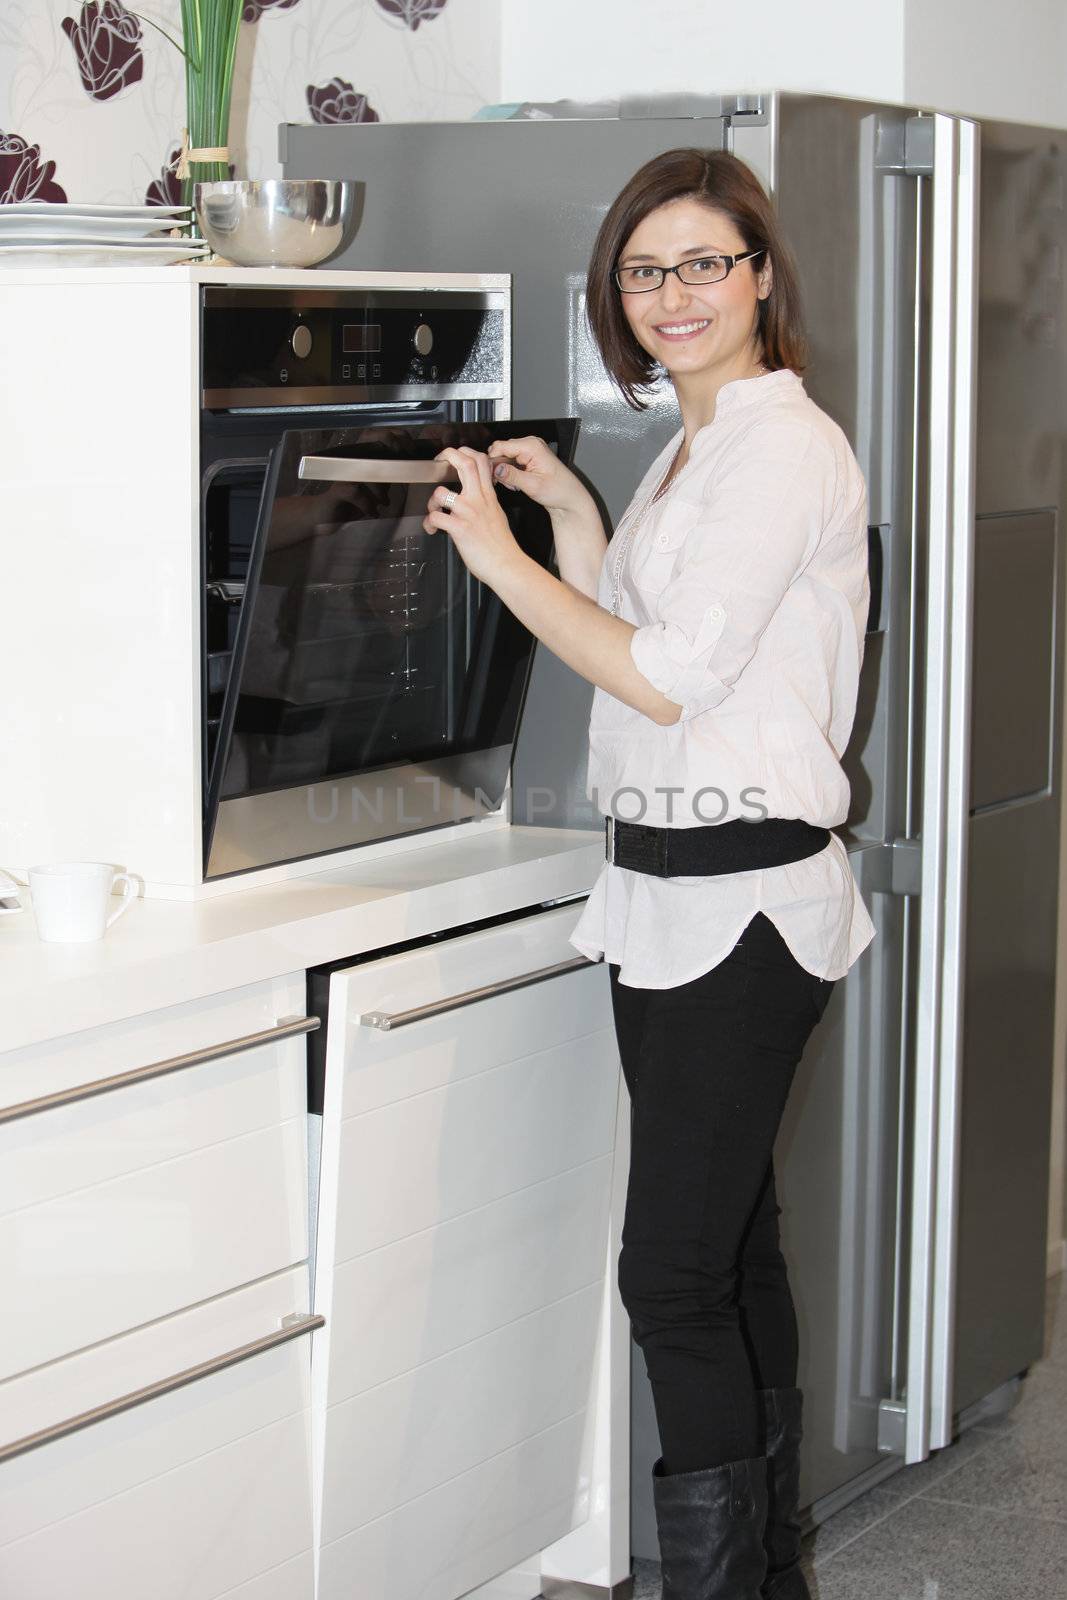 Stylish young woman cooking standing at her oven opening the door while smiling at the camera